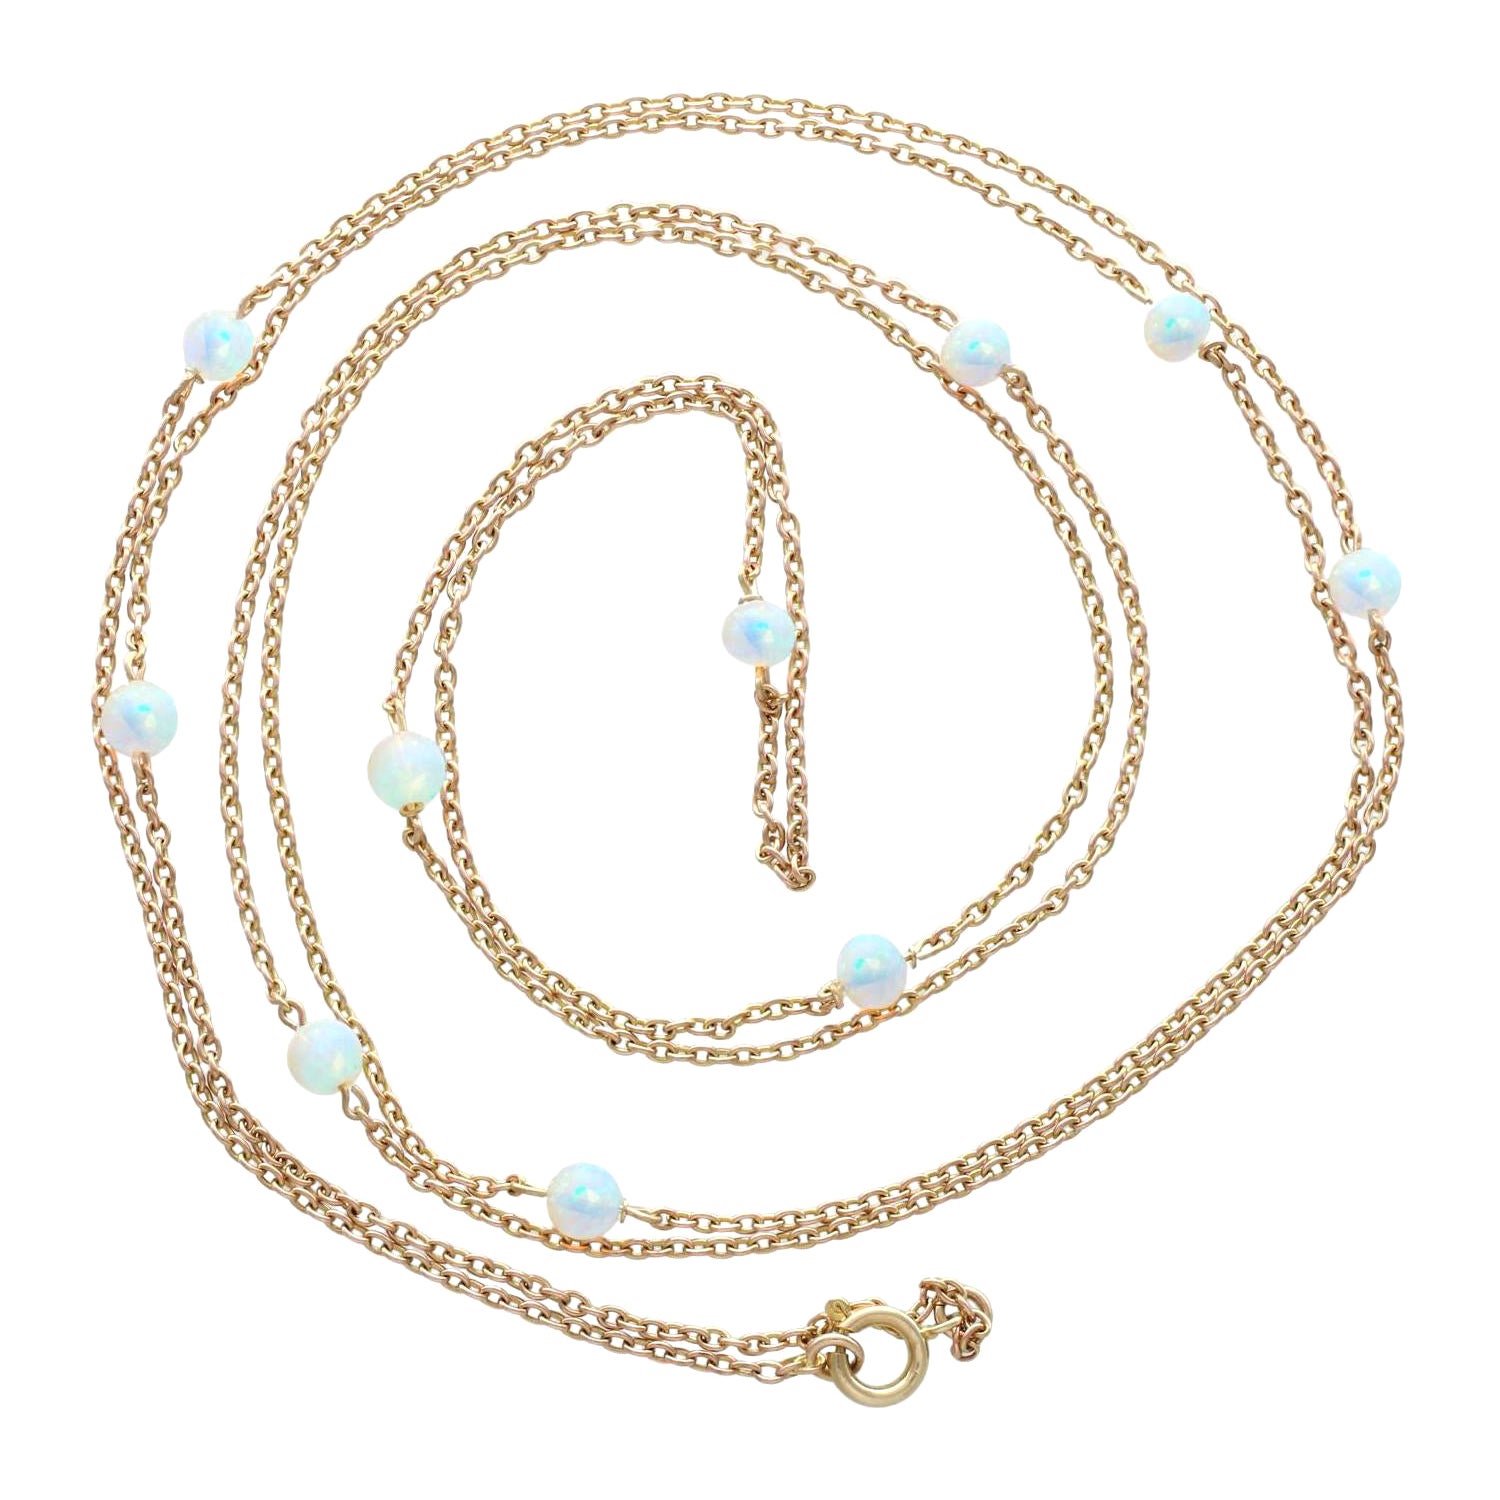 Antique 6.76 Carat Opal and Yellow Chain Necklace, Circa 1900